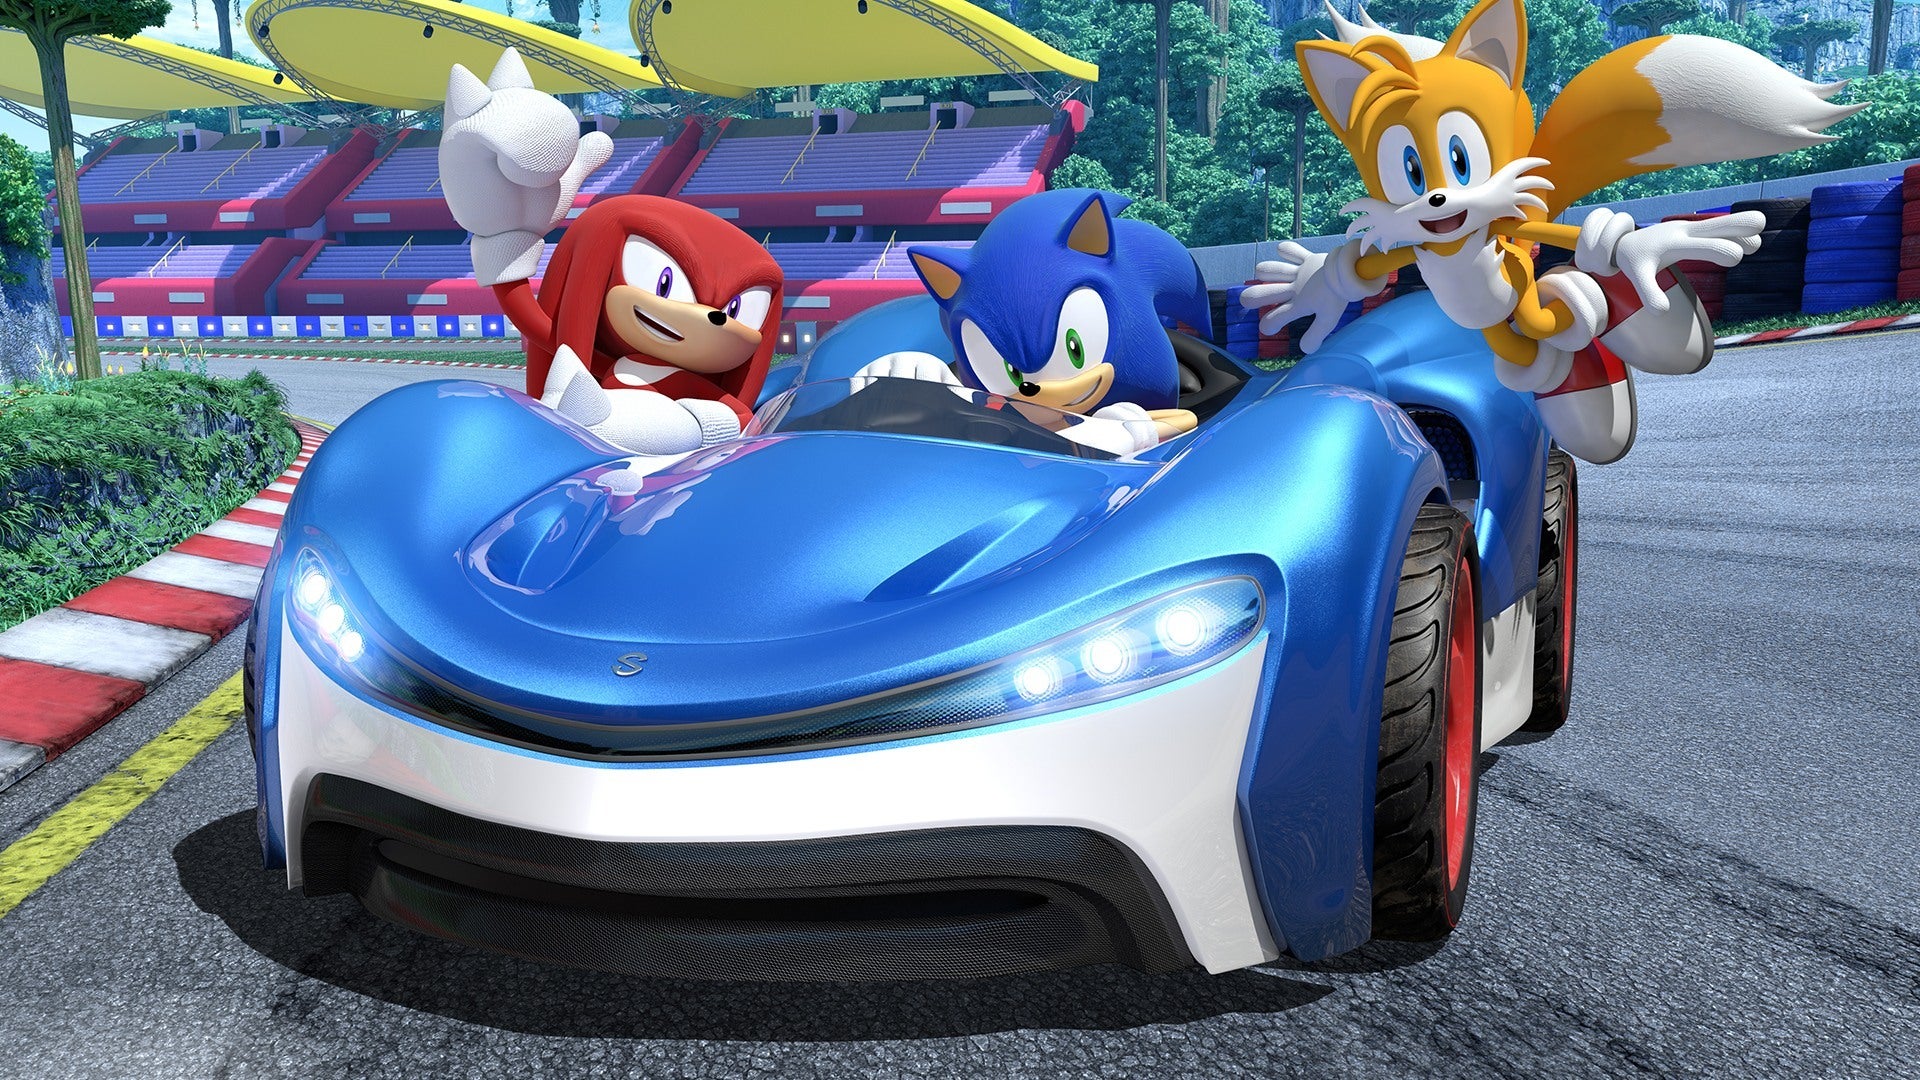 Team Sonic Racing may be getting a special edition for some reason